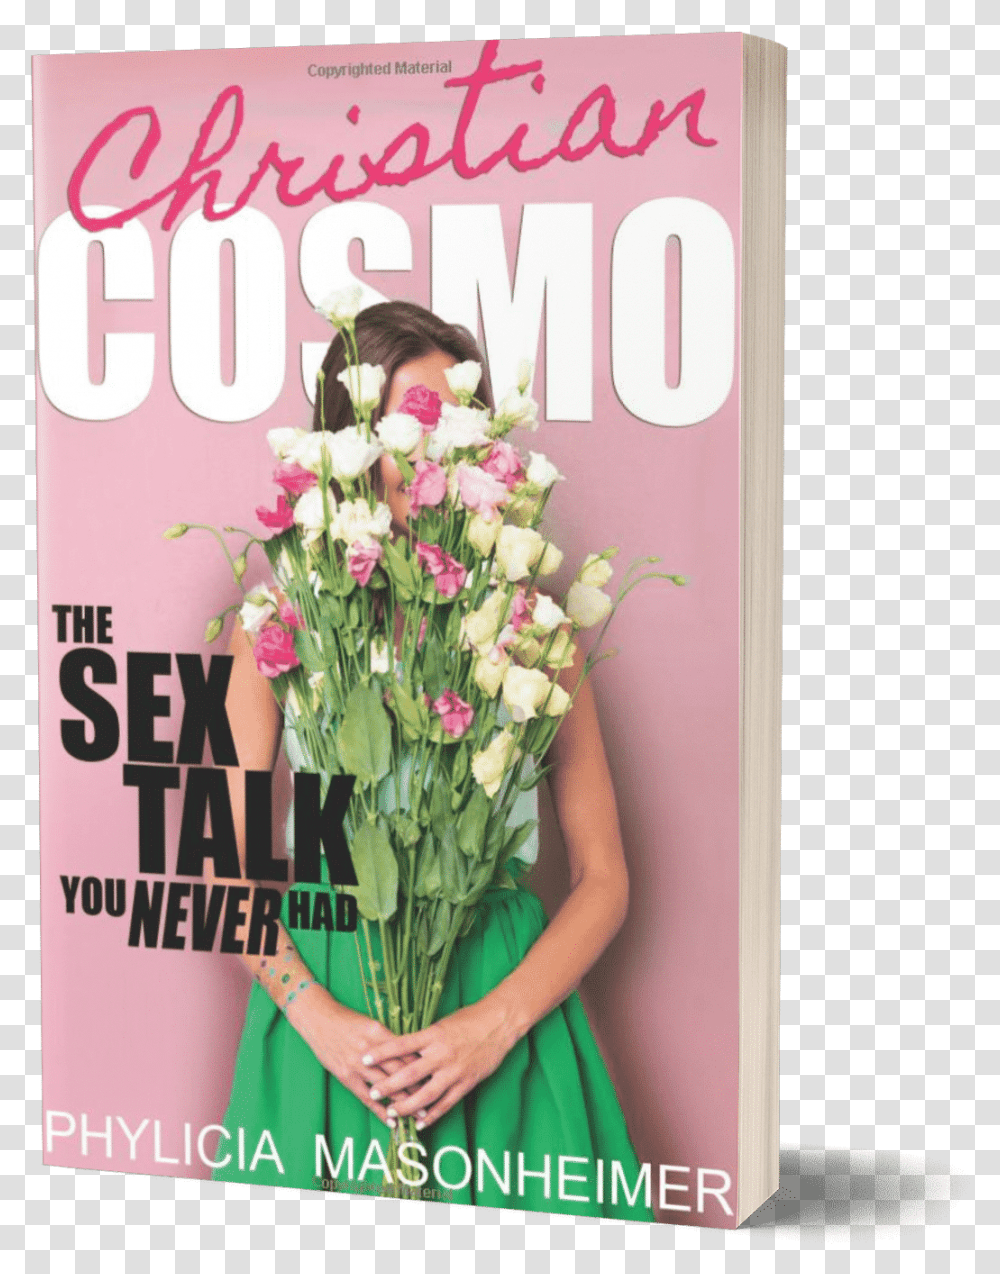 Christian Cosmo Ebook Lovely, Magazine, Person, Human, Flower Transparent Png